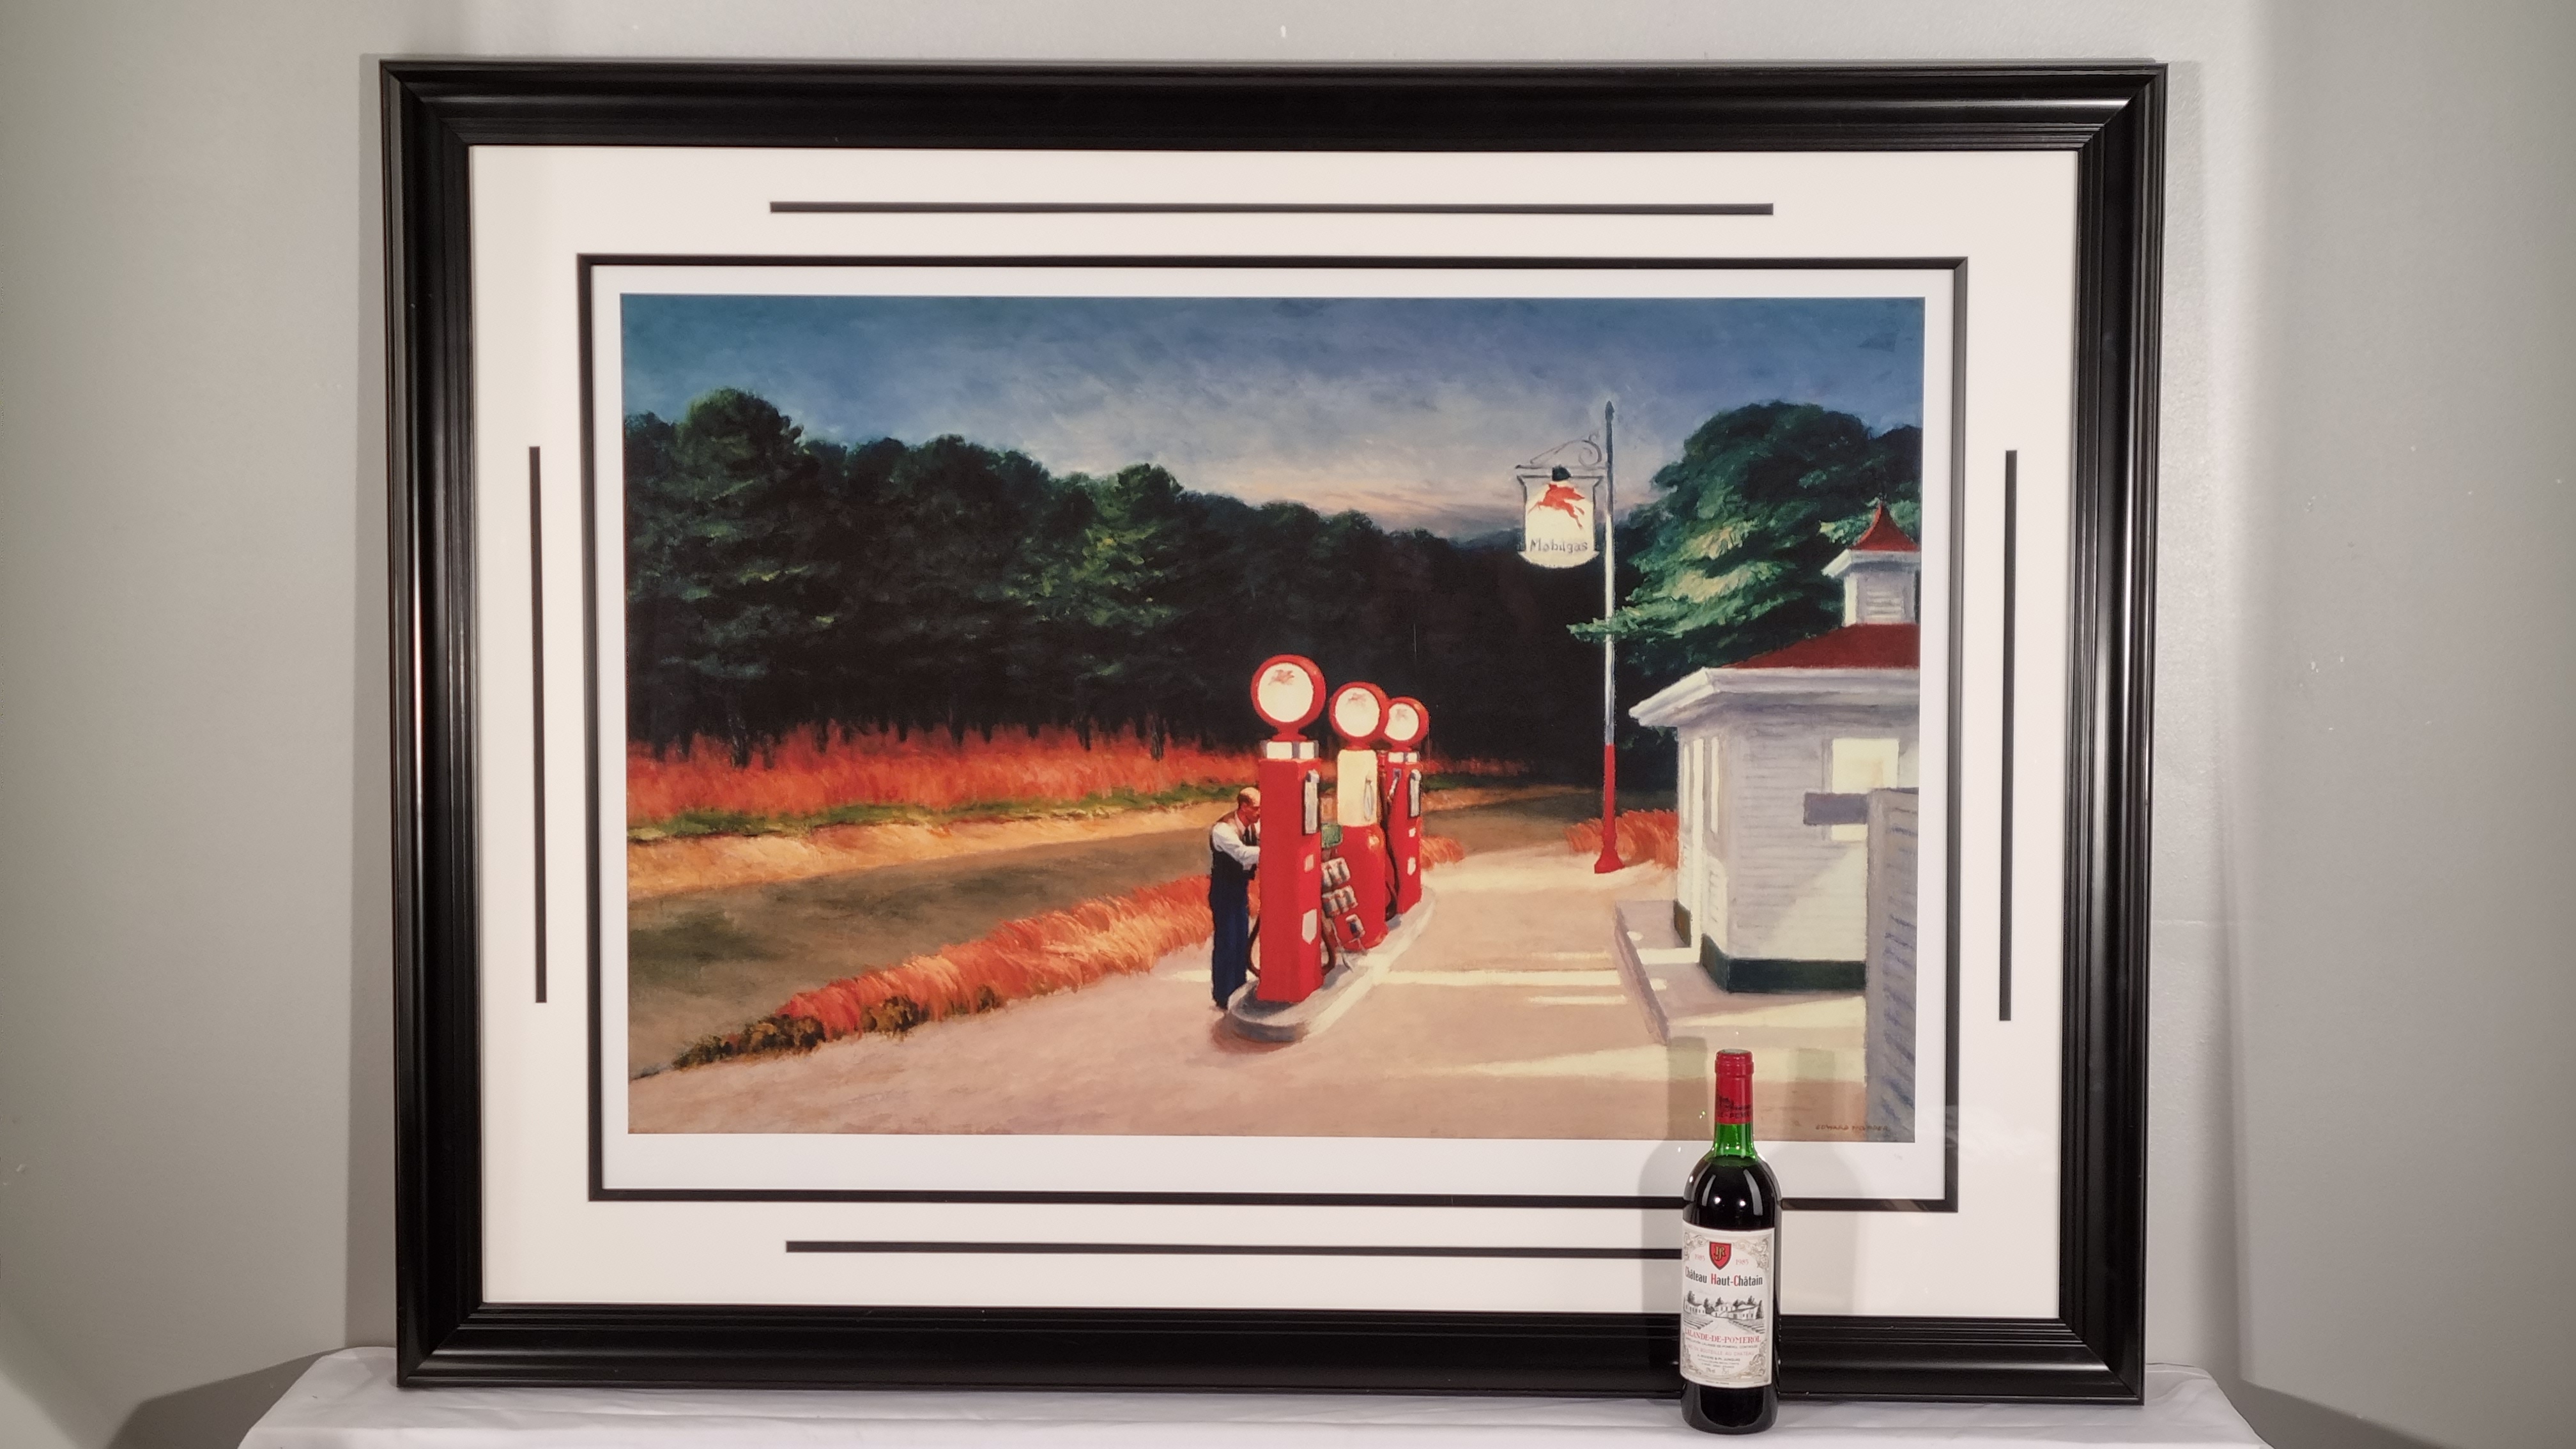 Rare Edward Hopper Limited Edition "Gas, 1940" Certificated. - Image 7 of 9